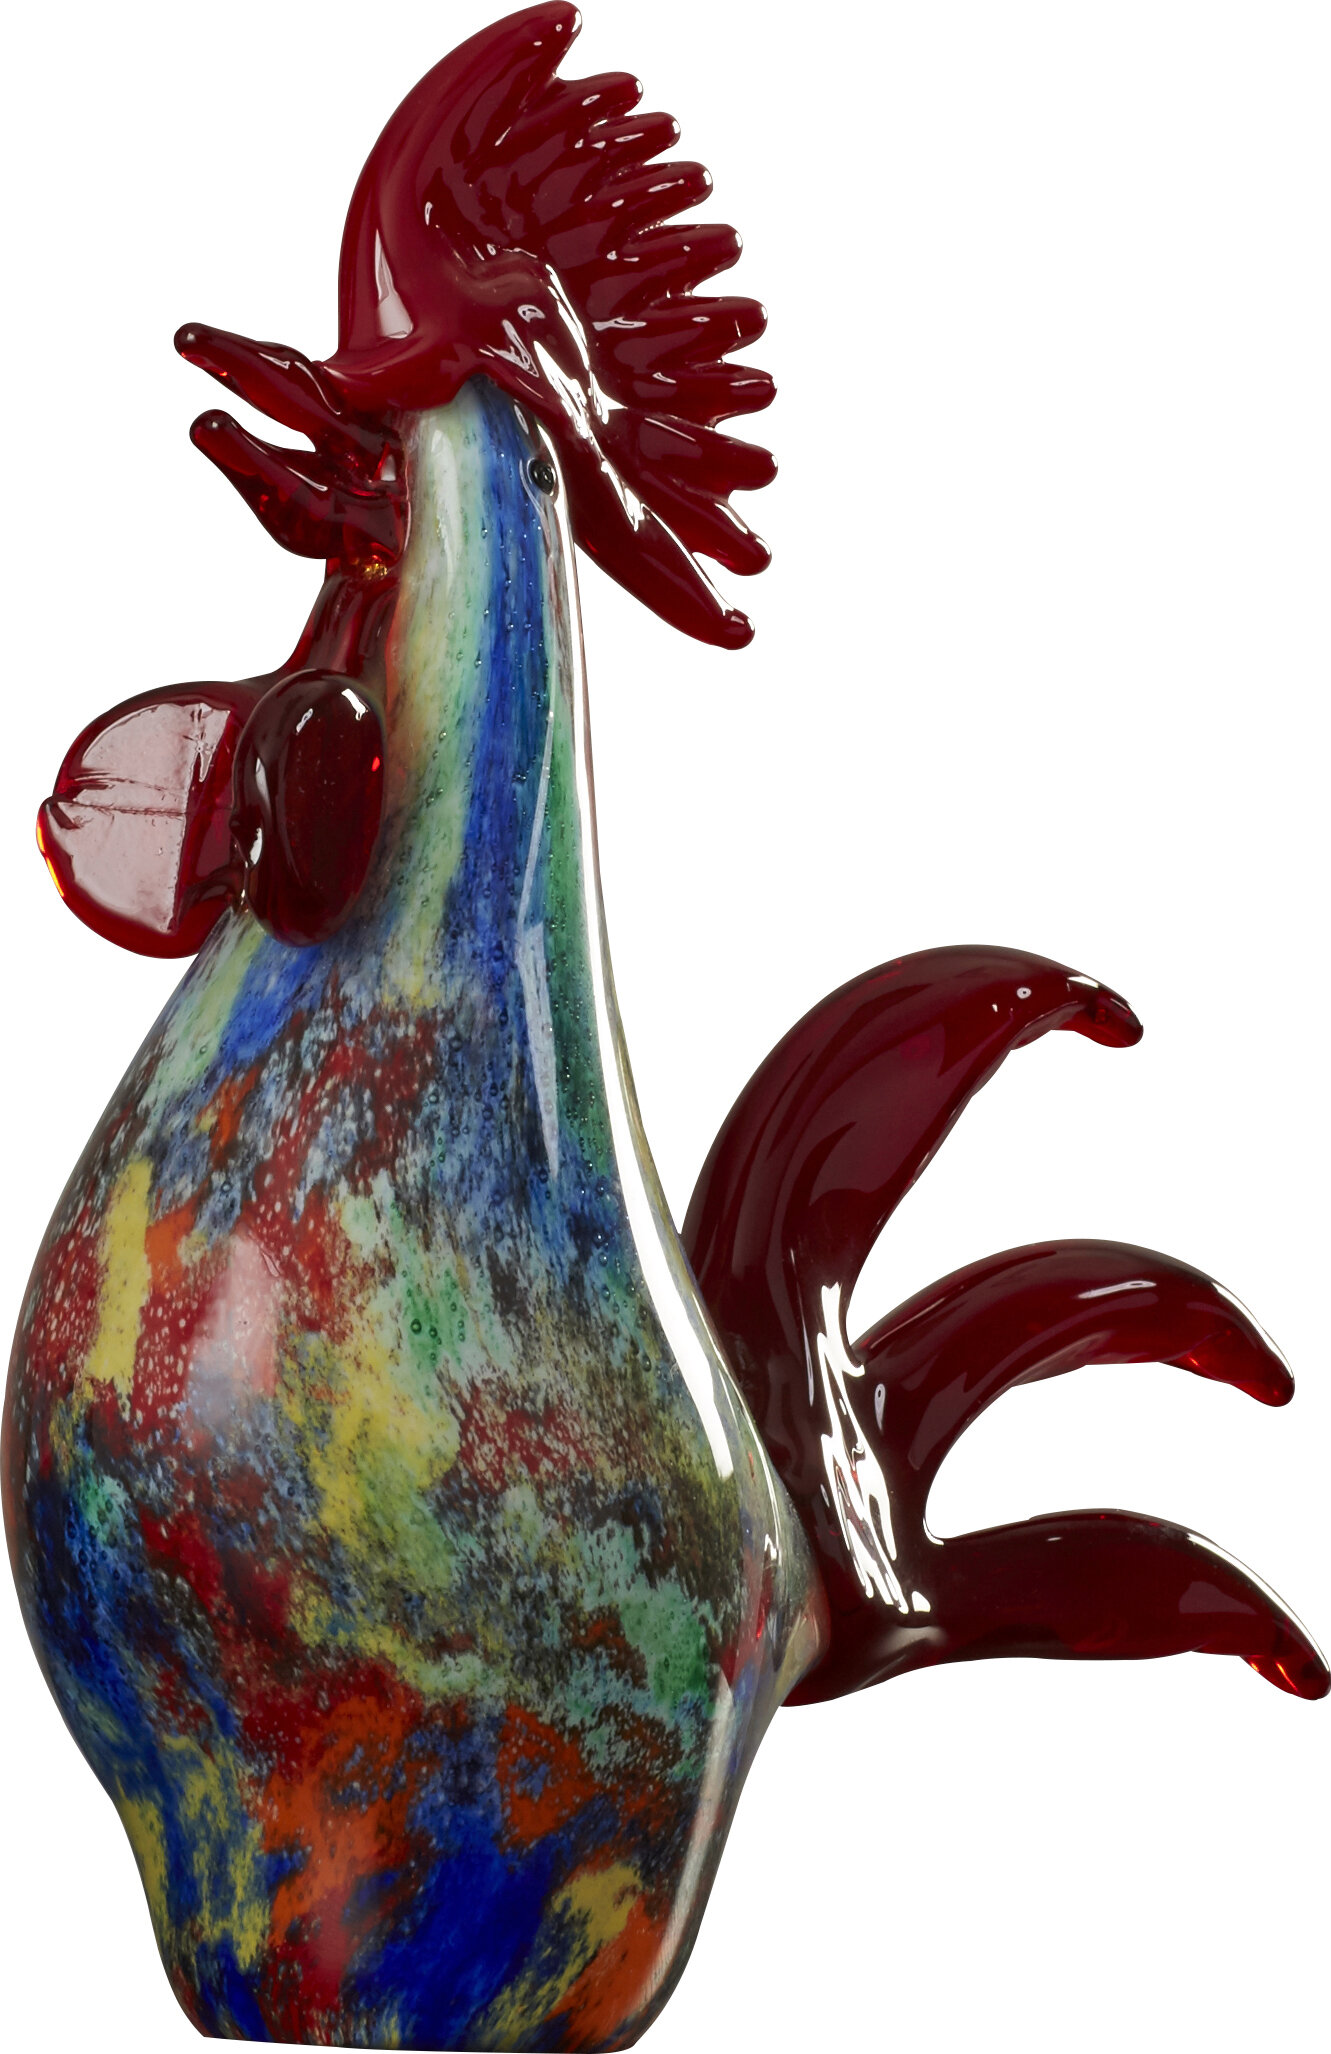 glass rooster ornament rooster figurine glass bird glass animals glass figurine Glass rooster hand blown glass rooster